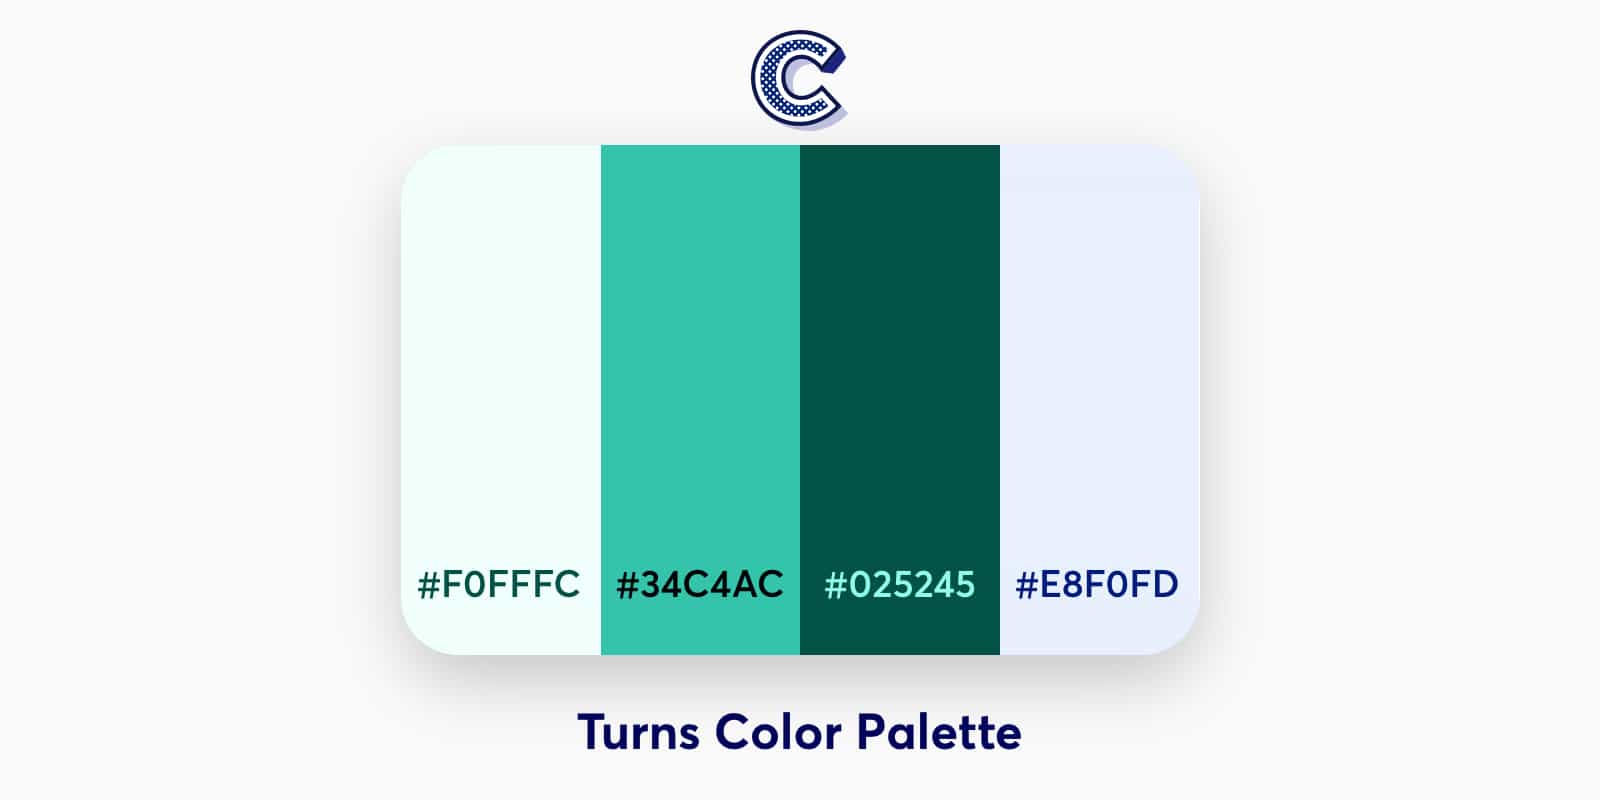 the featured image of turns color palette